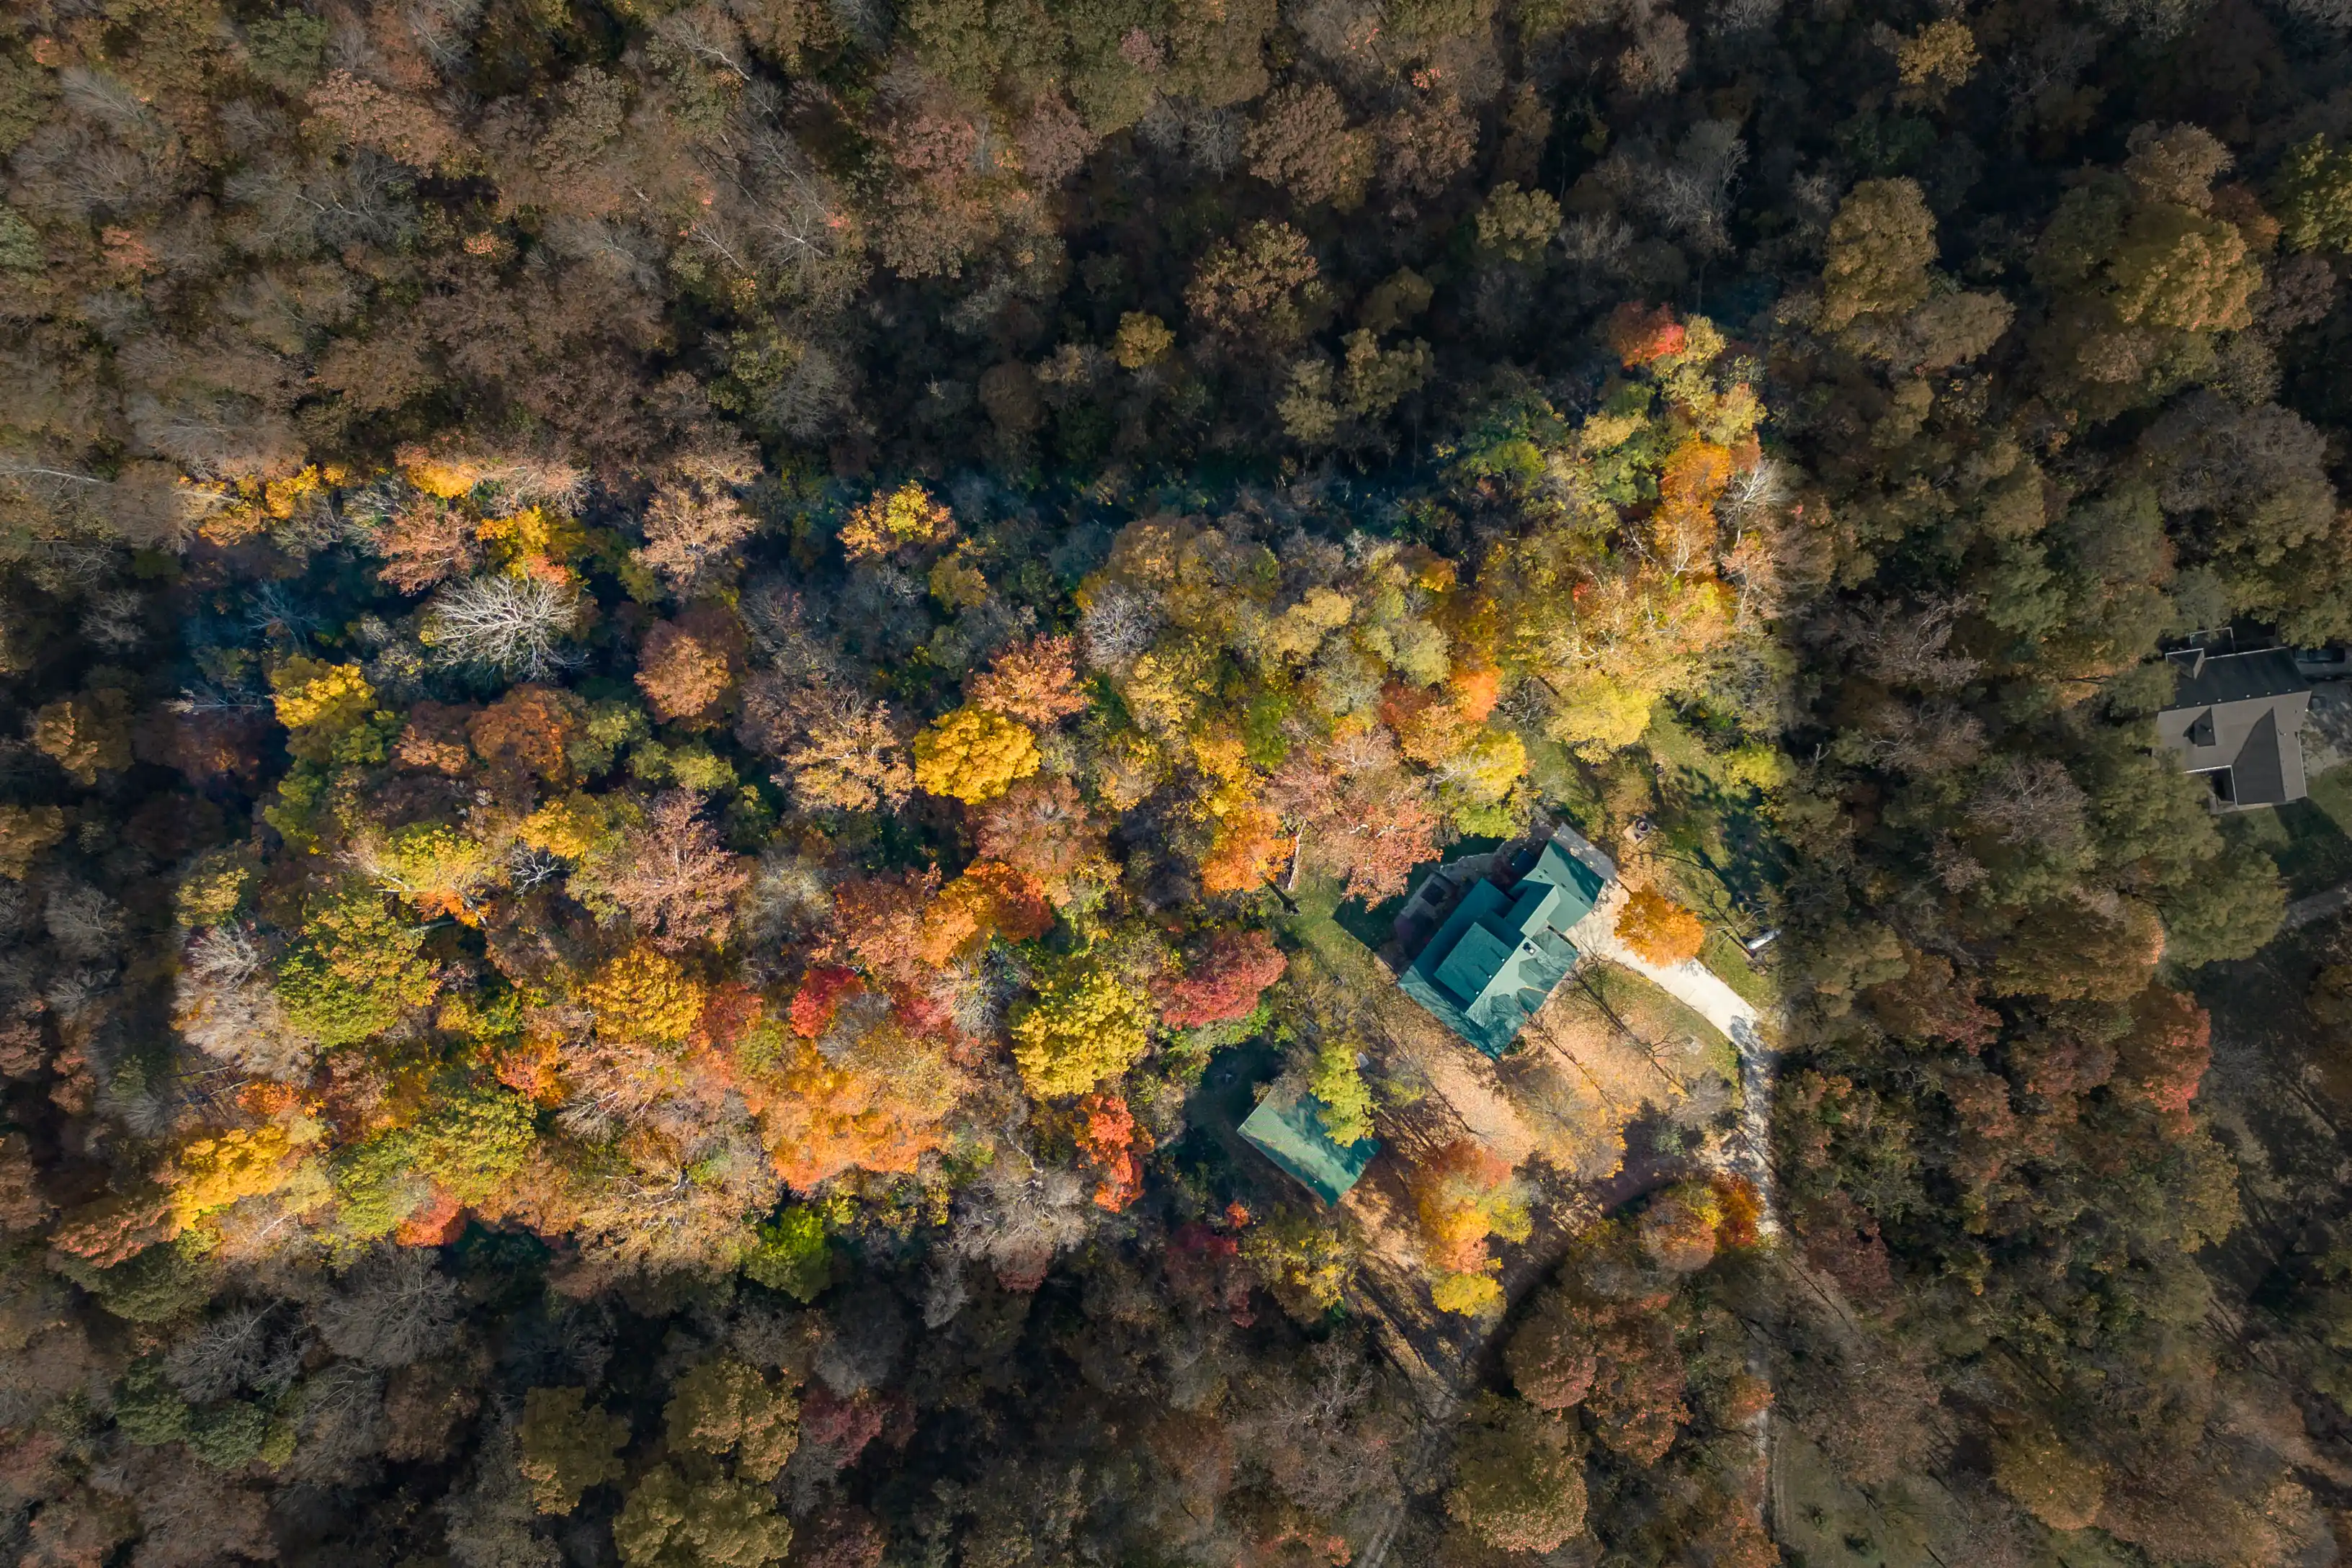 Aerial view of a lush forest in autumn with colorful foliage and two houses nestled among the trees.